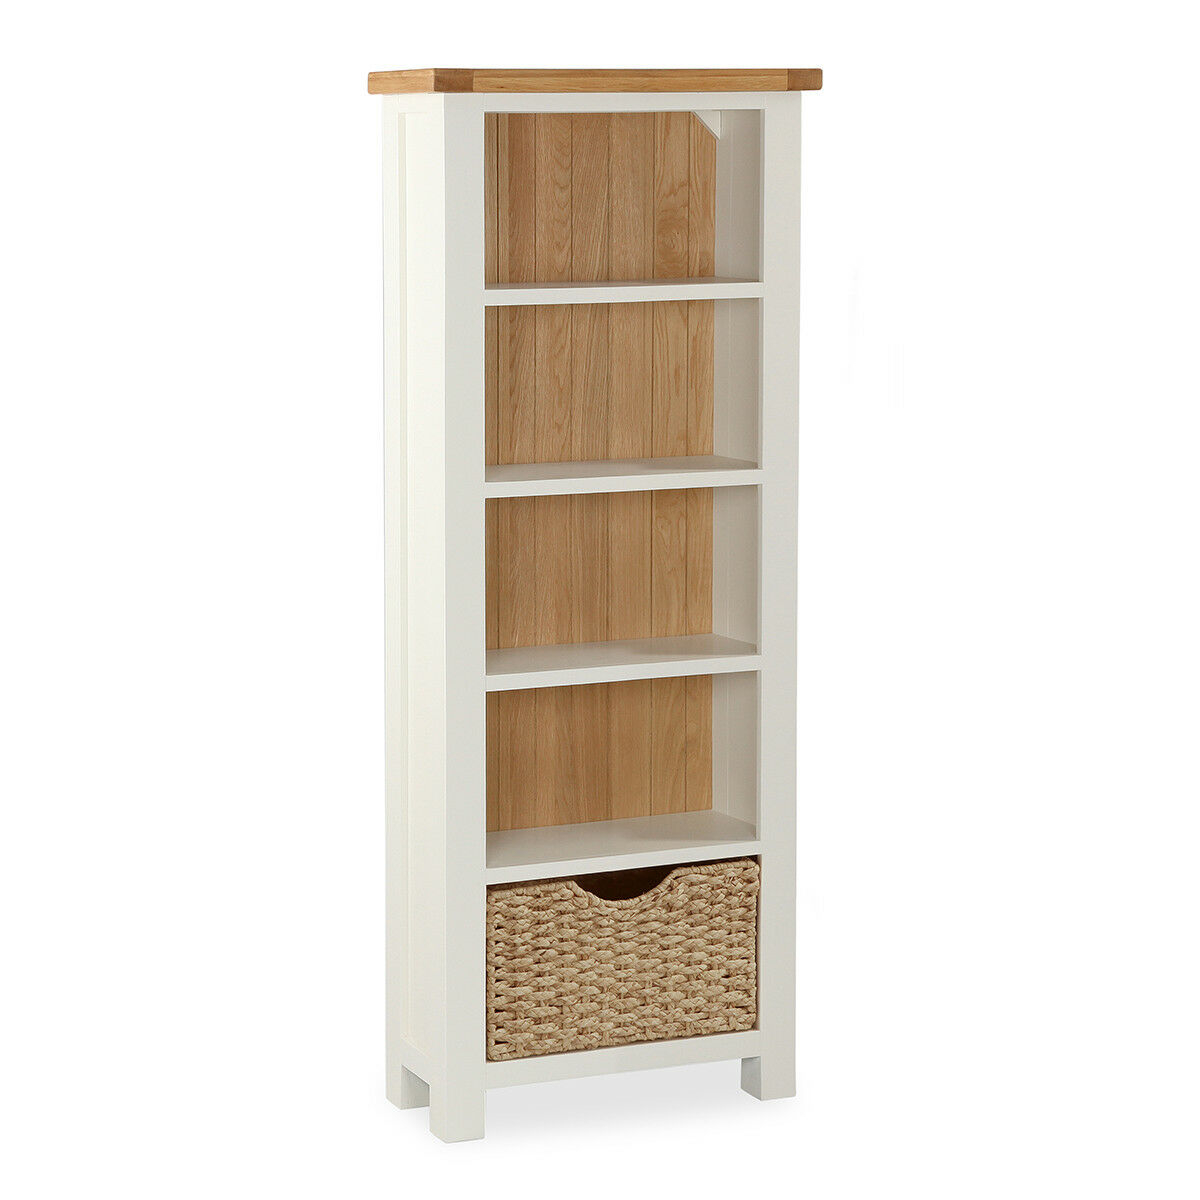 Details About Hampshire Cream Painted Oak Top Tall Slim Bookcase With Storage Basket for measurements 1200 X 1200